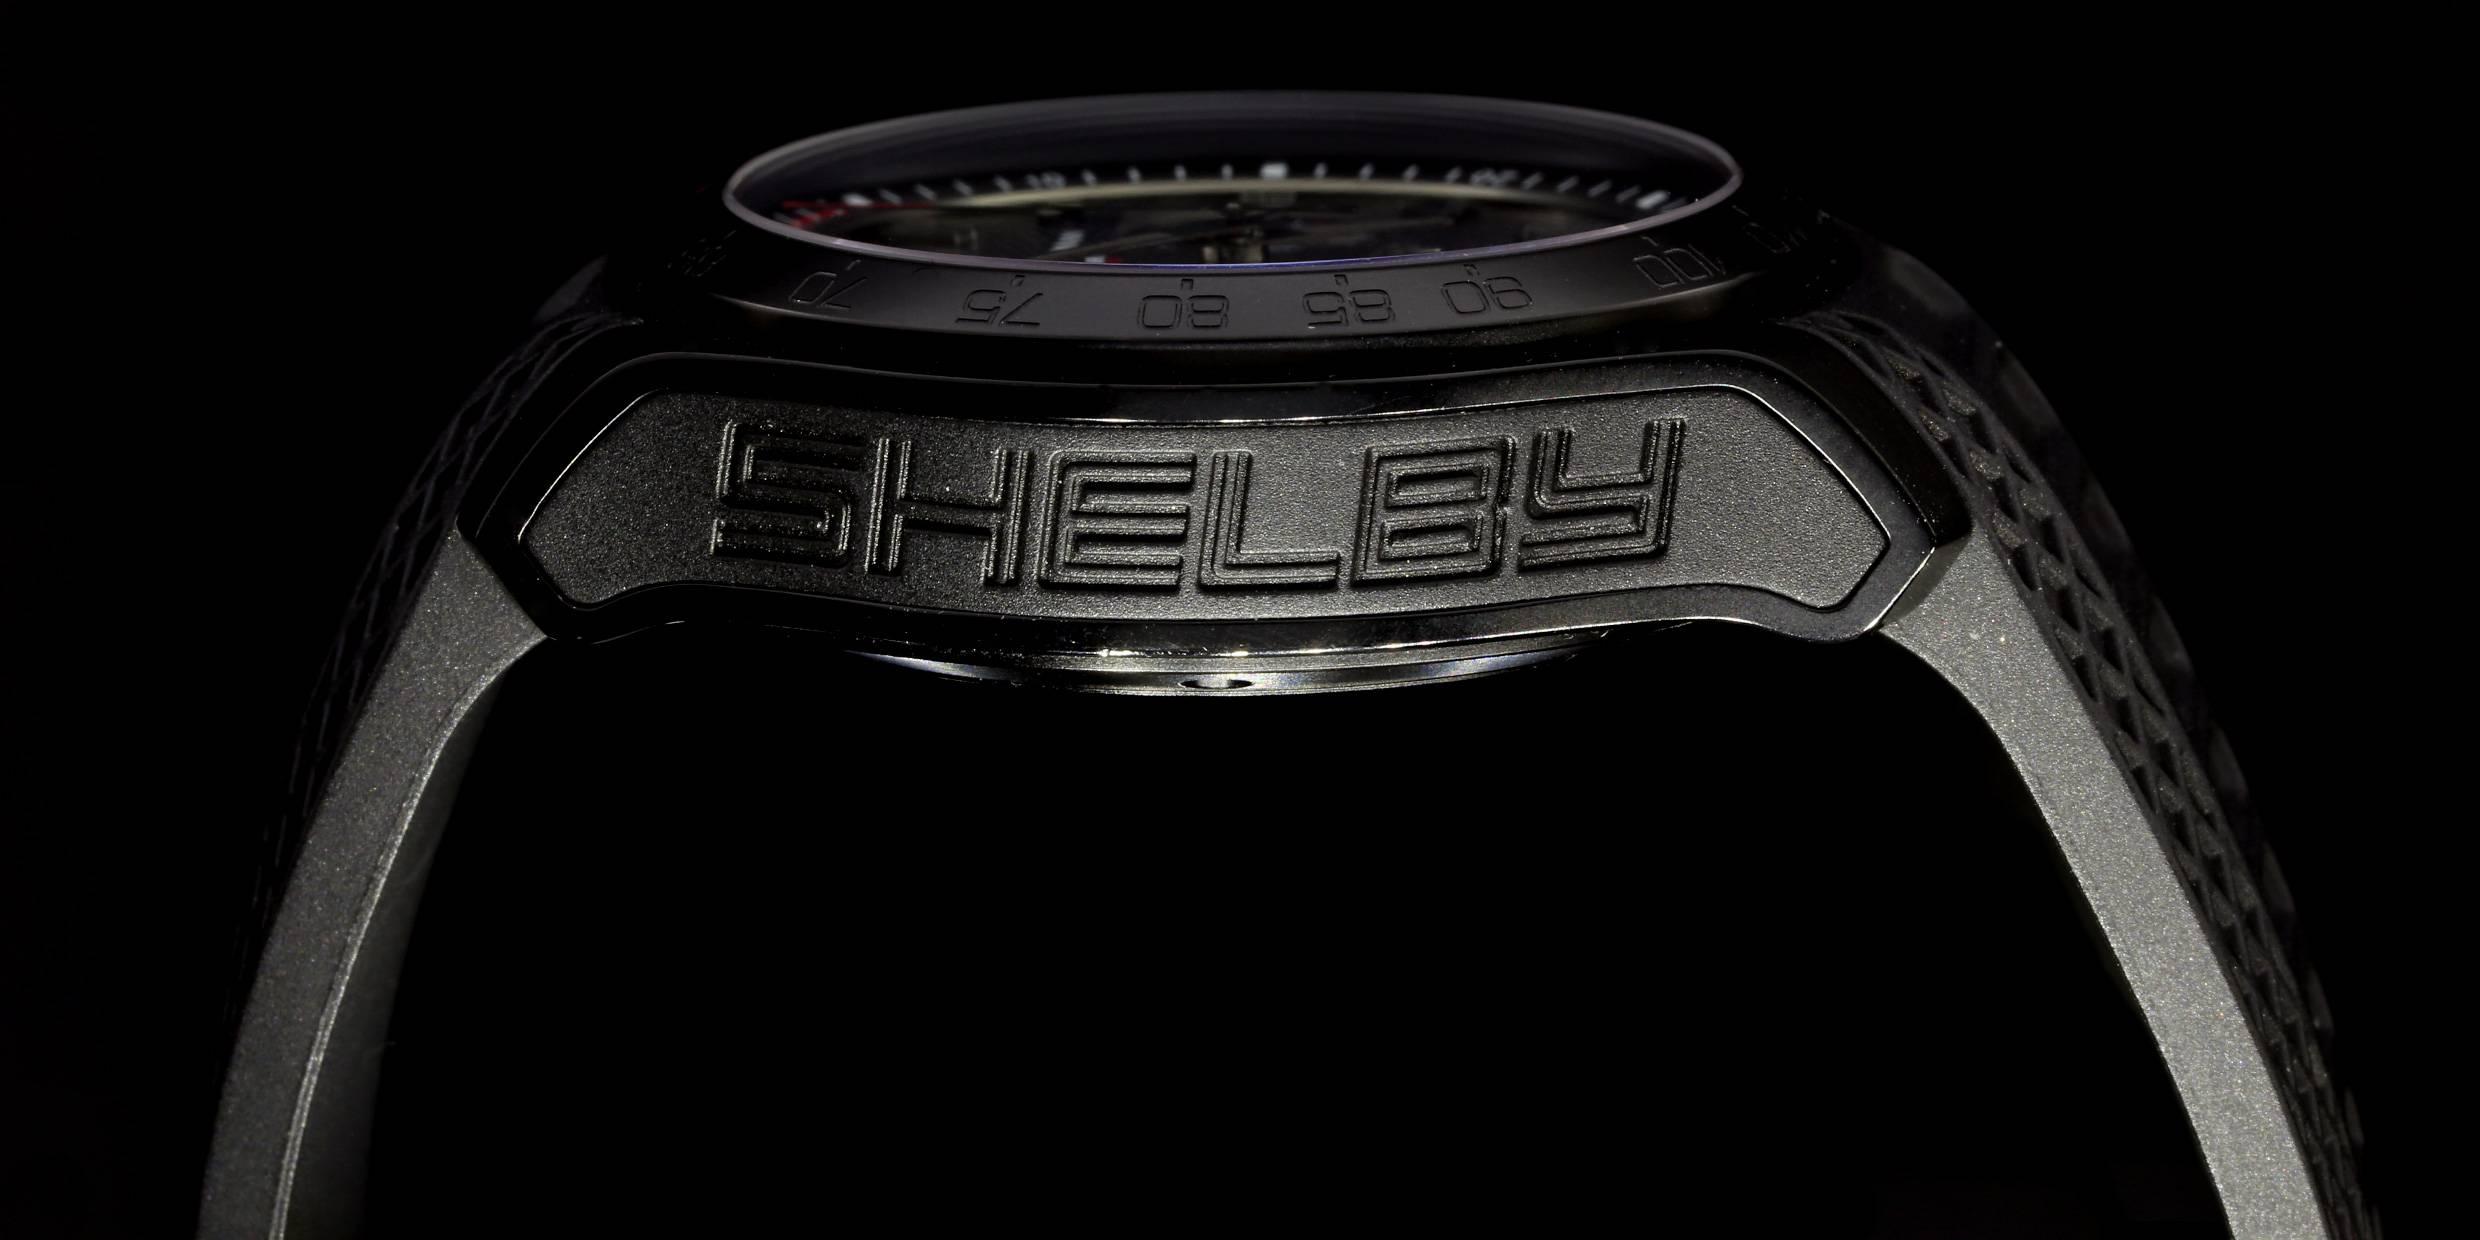 This watch is a brand new, special limited edition watch from David Yurman & Carroll Shelby. The 43 millimeter watch case is comprised of black PVD coated, stainless steel. The Shelby logo is on the left side & the David Yurman logo is on the right